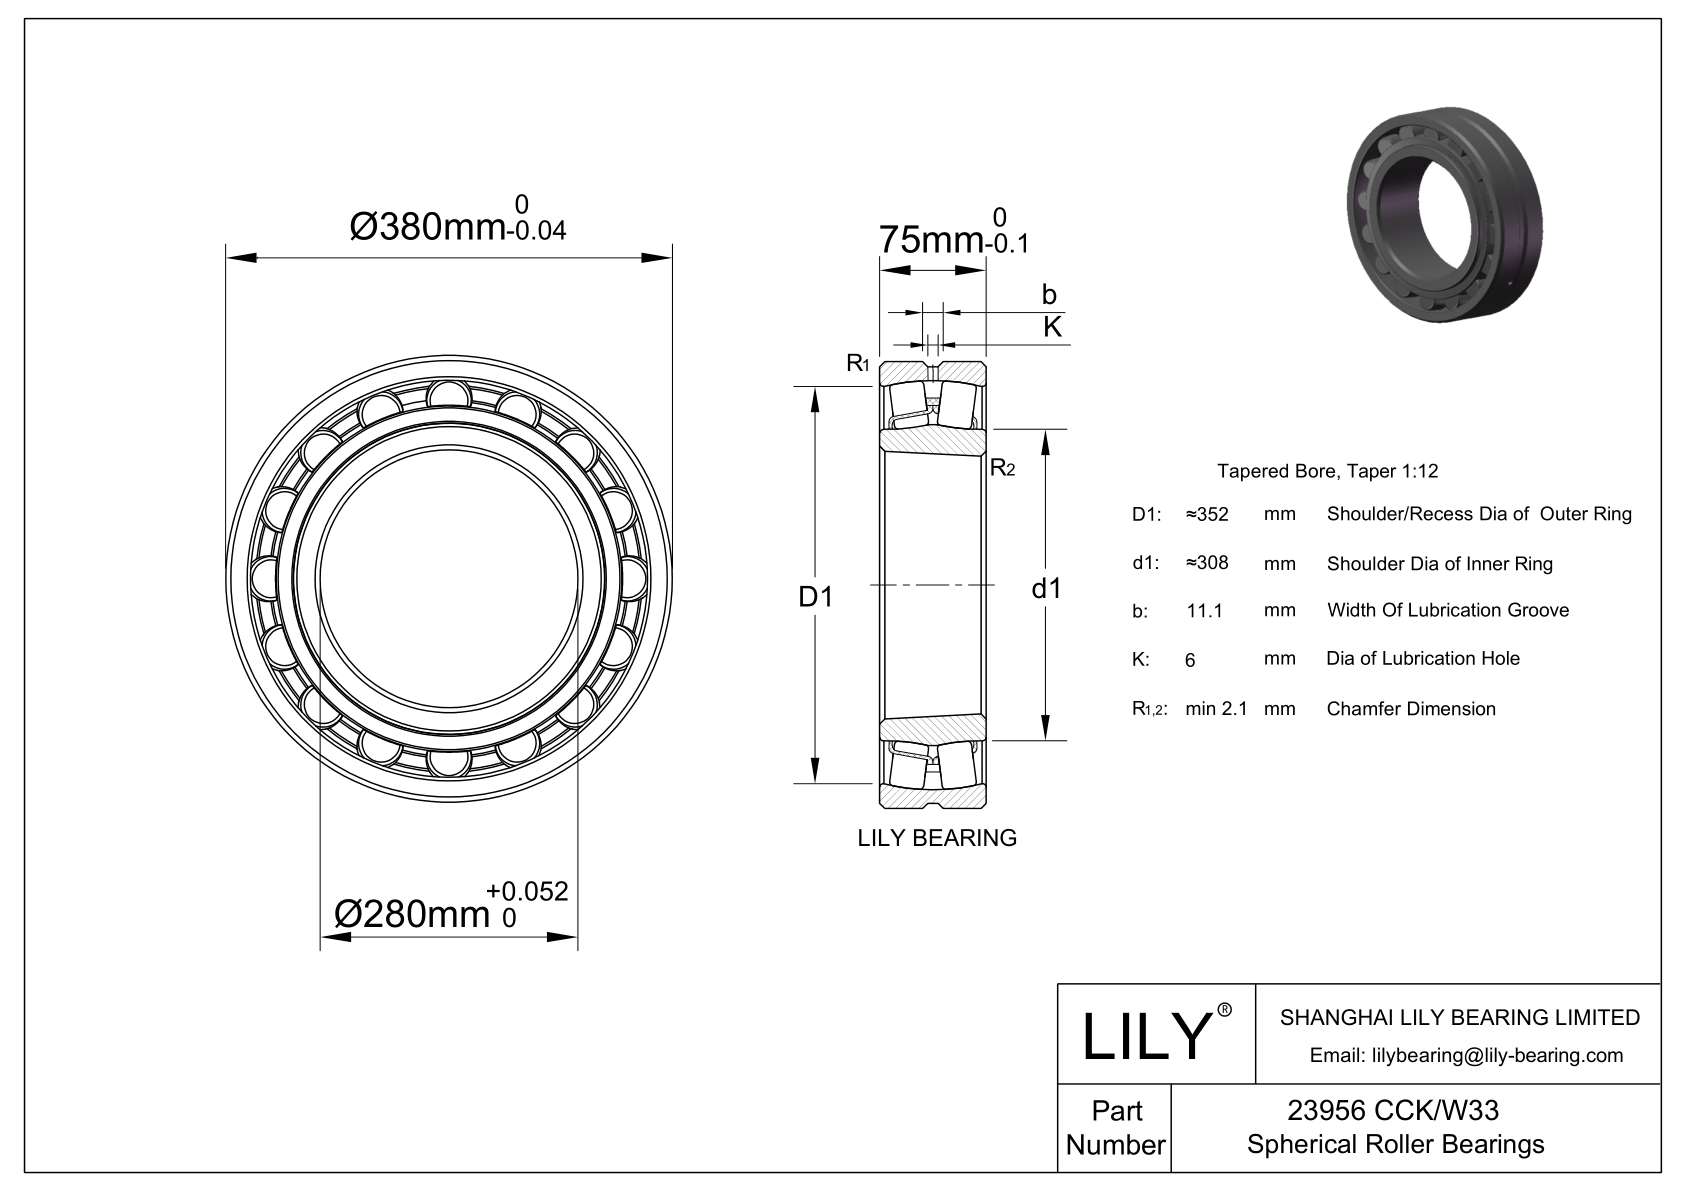 23956 CCK/W33 Double Row Spherical Roller Bearing cad drawing